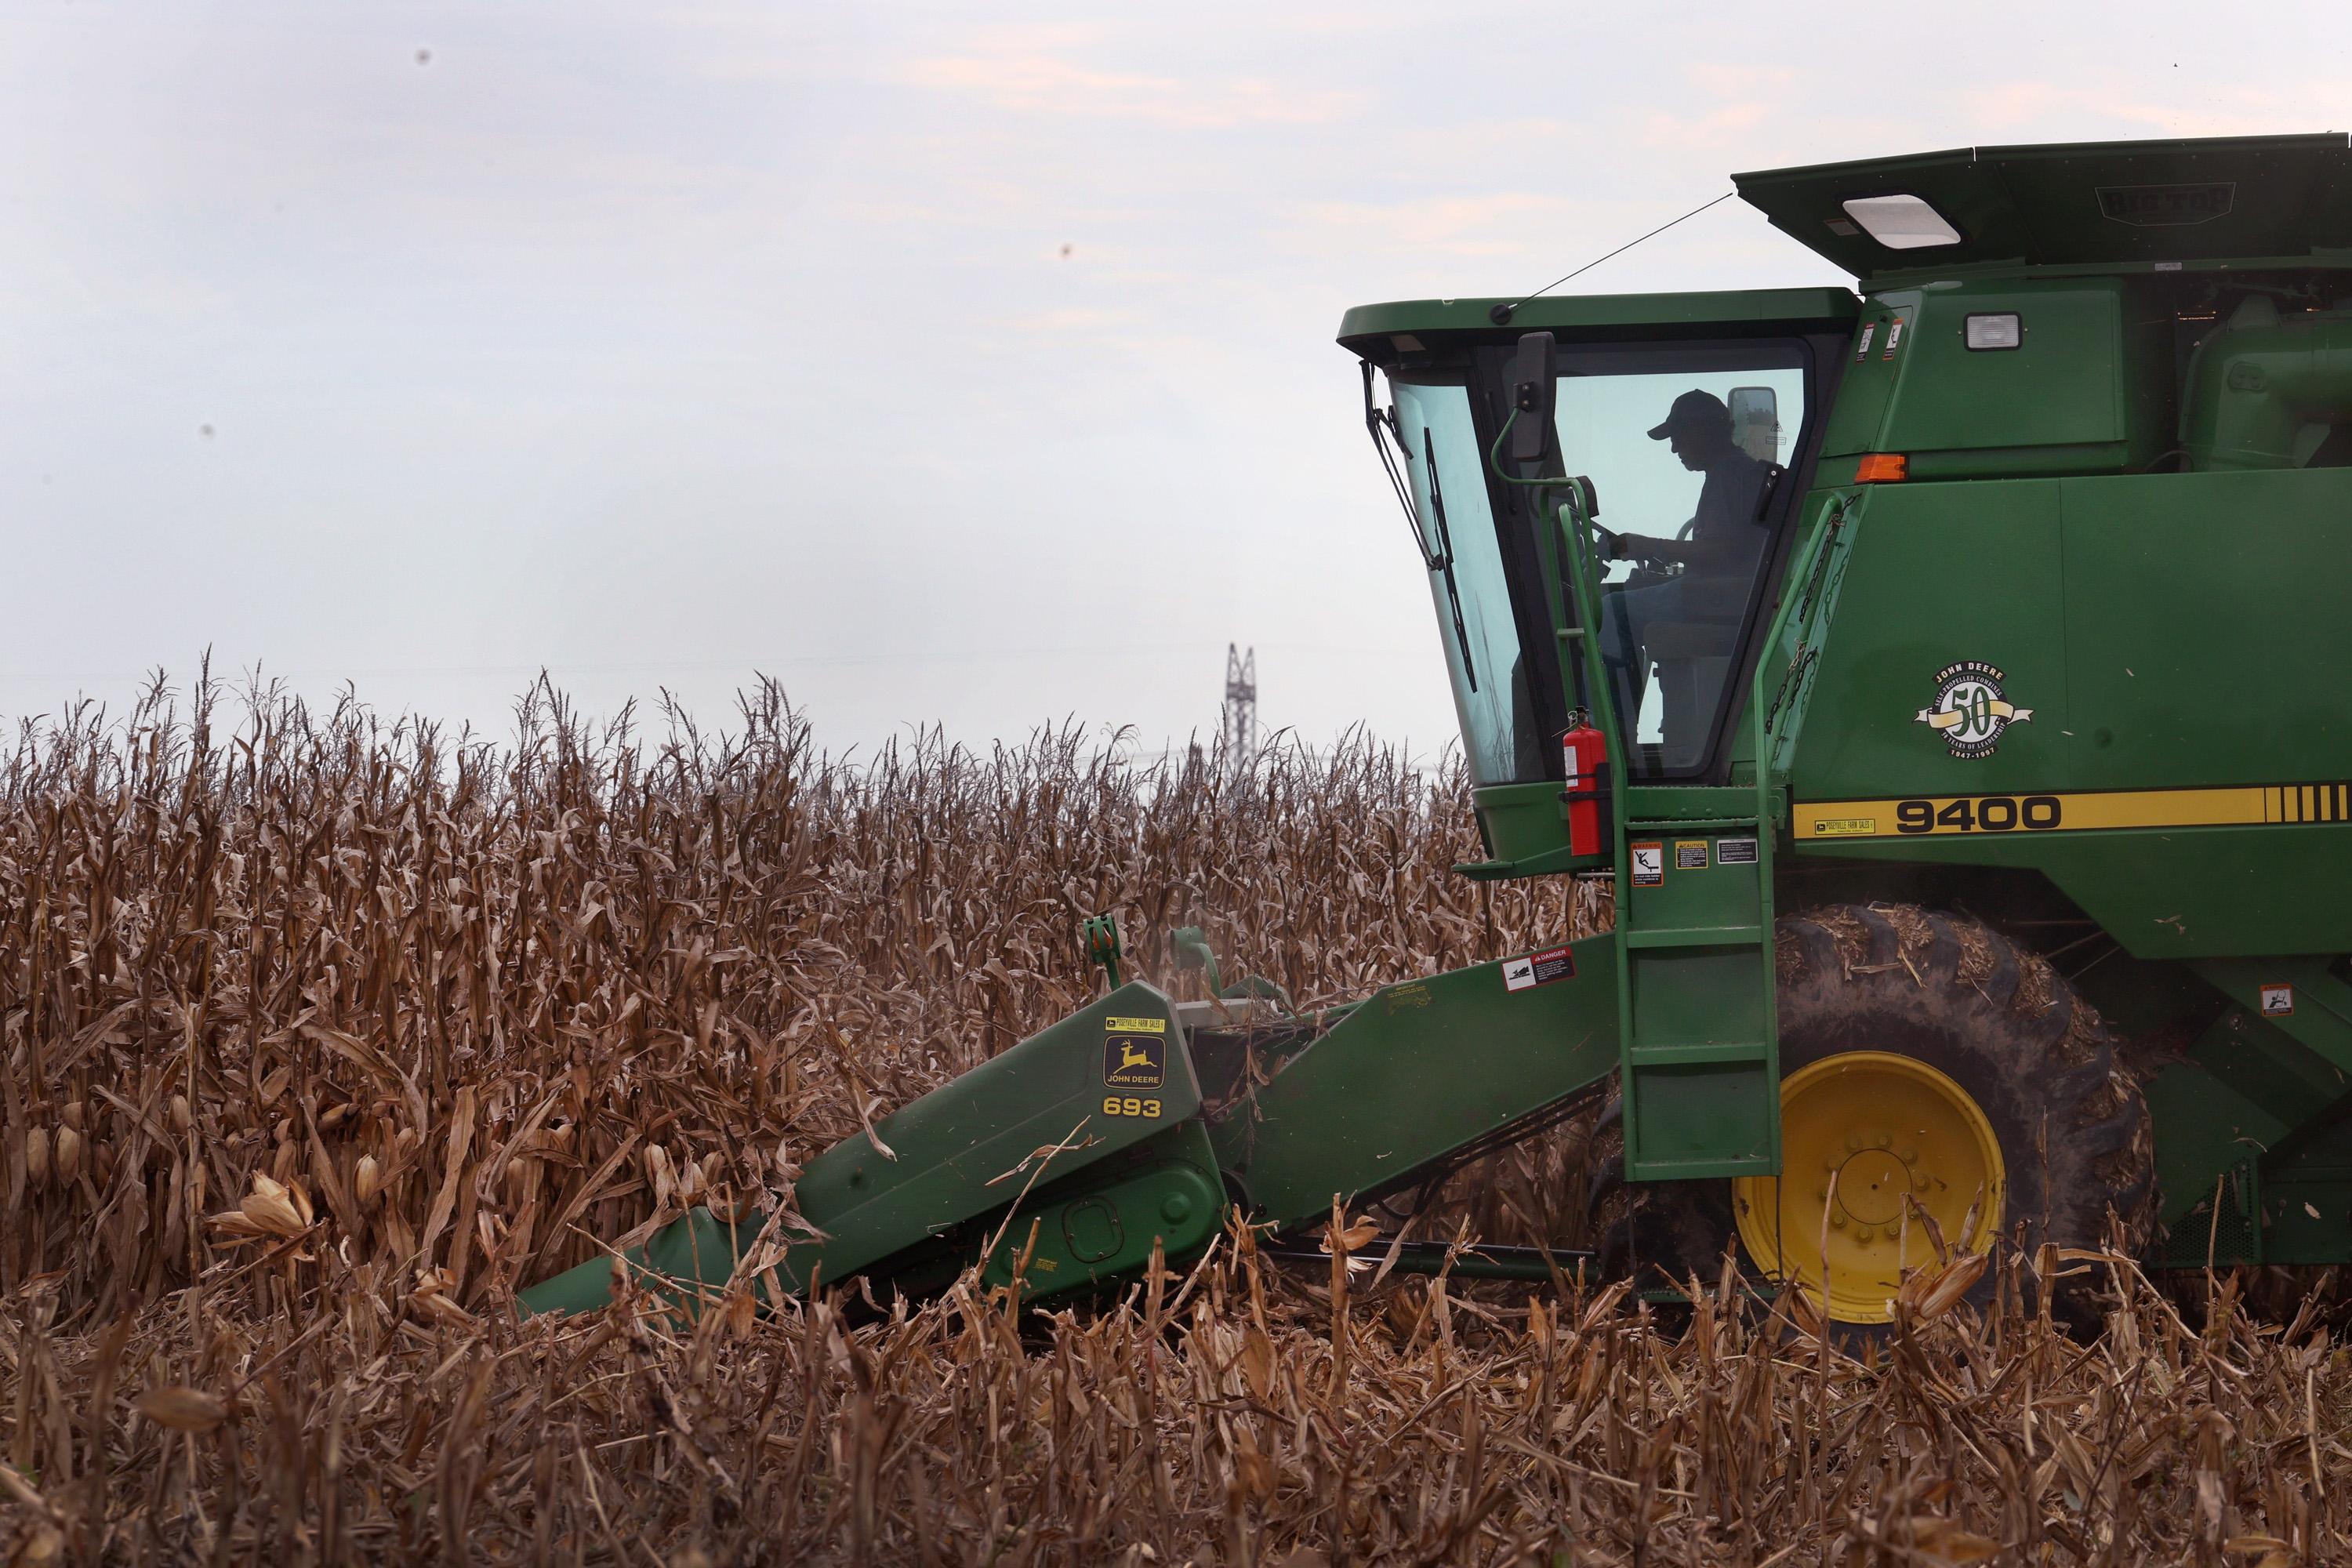 A dry corn field. To the right of the image is a large green tractor, cutting into the crop. The silhouette of the driver is pictured at the wheel. 